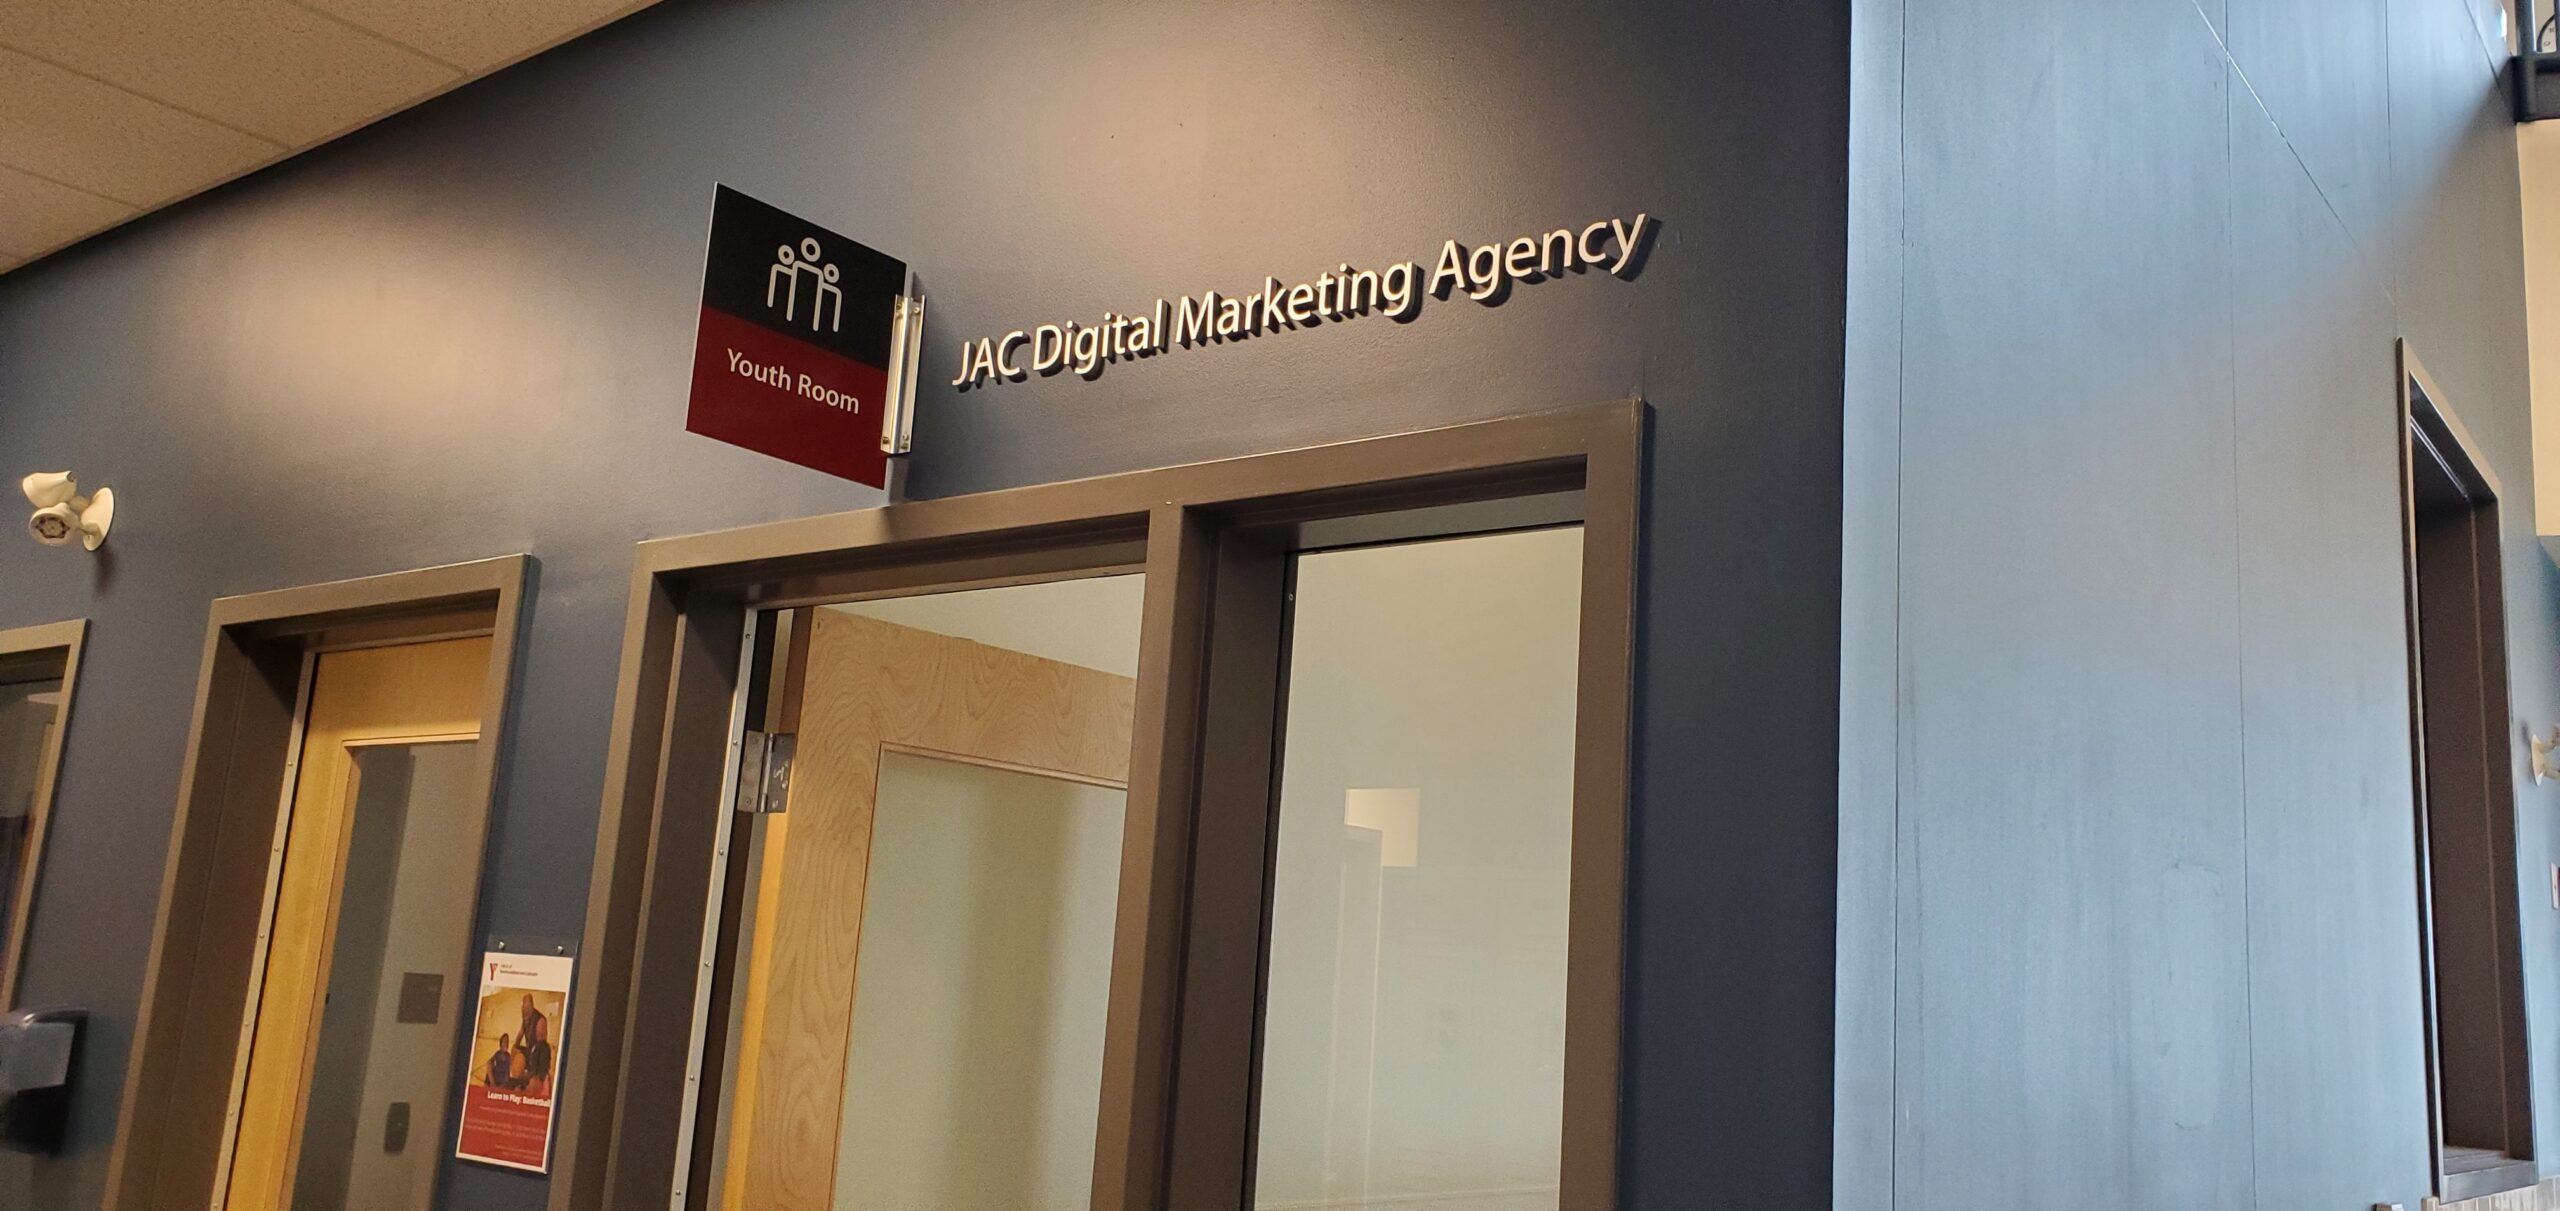 a sign above a doorway that says "Youth Room" with "JAC Digital Marketing Agency" next to it